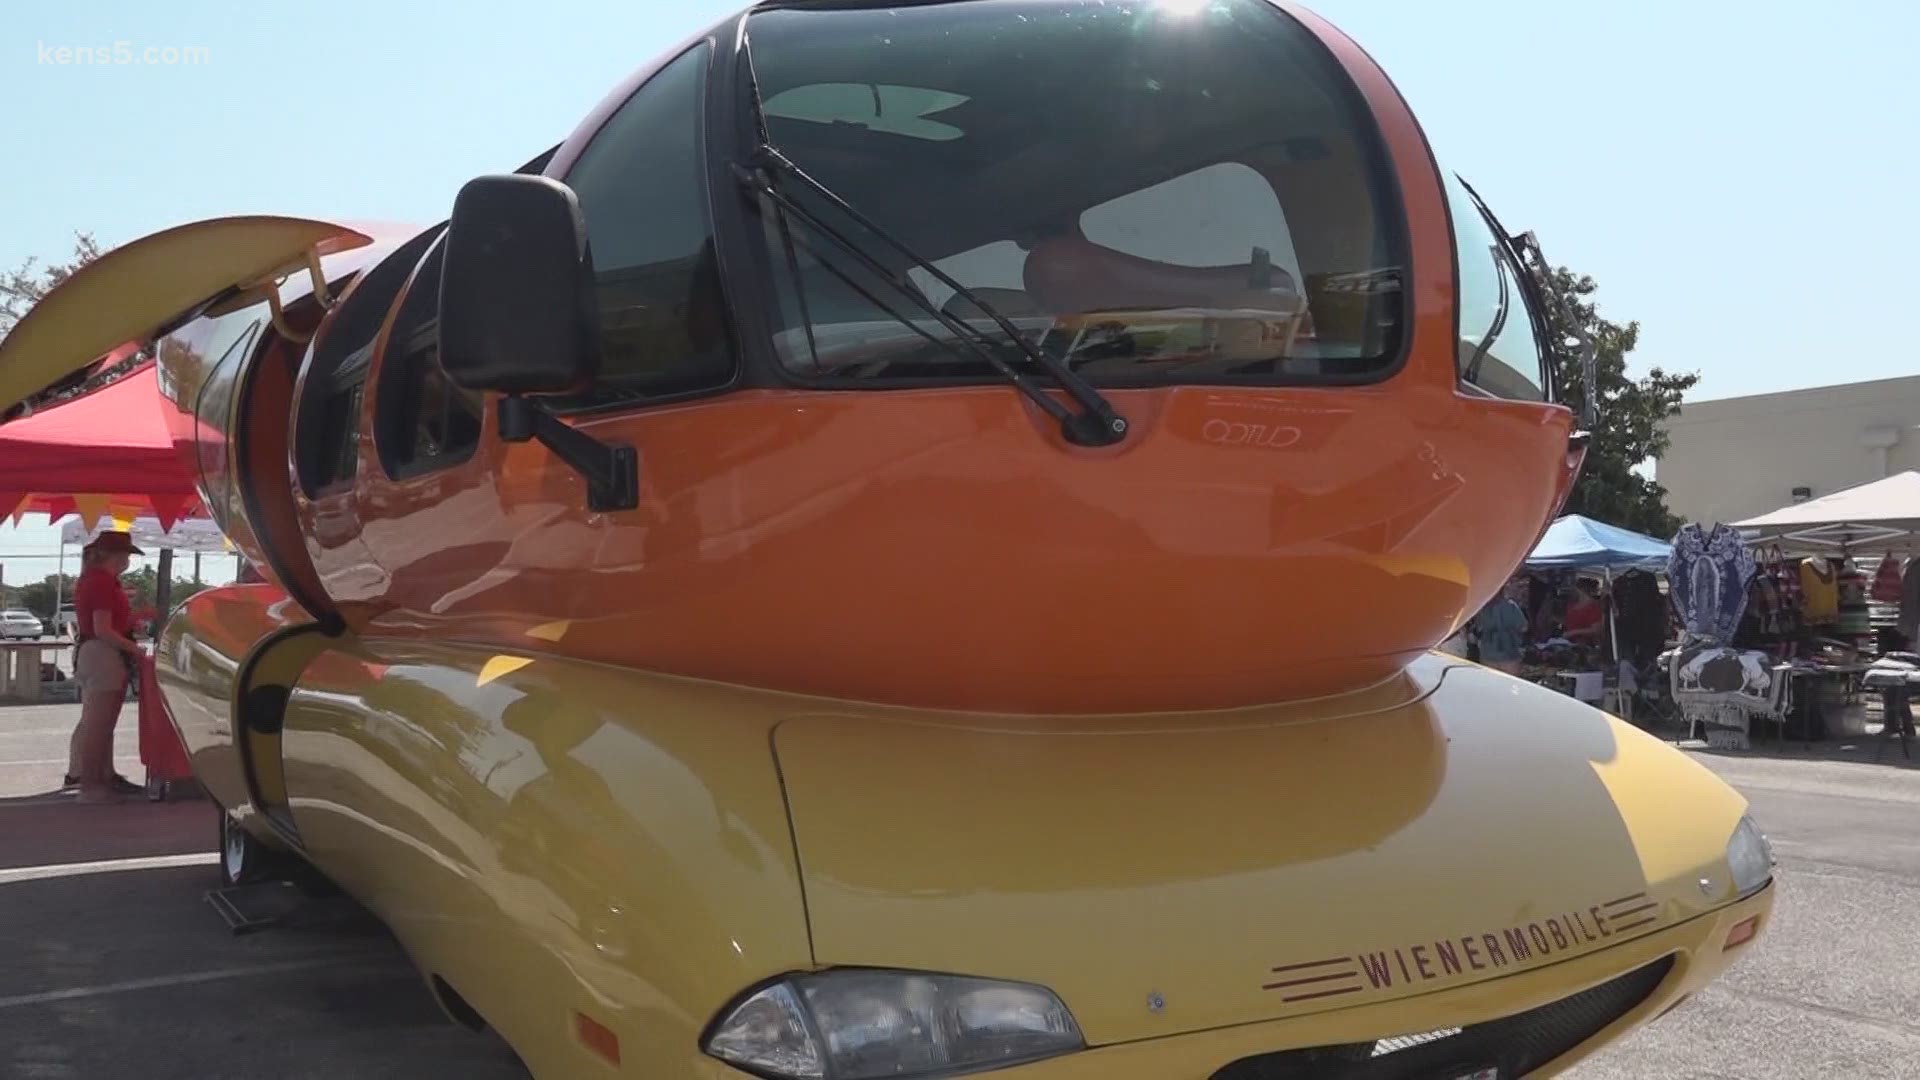 The Oscar Mayer Wienermobile makes a stop in San Antonio as it makes its way across the country.